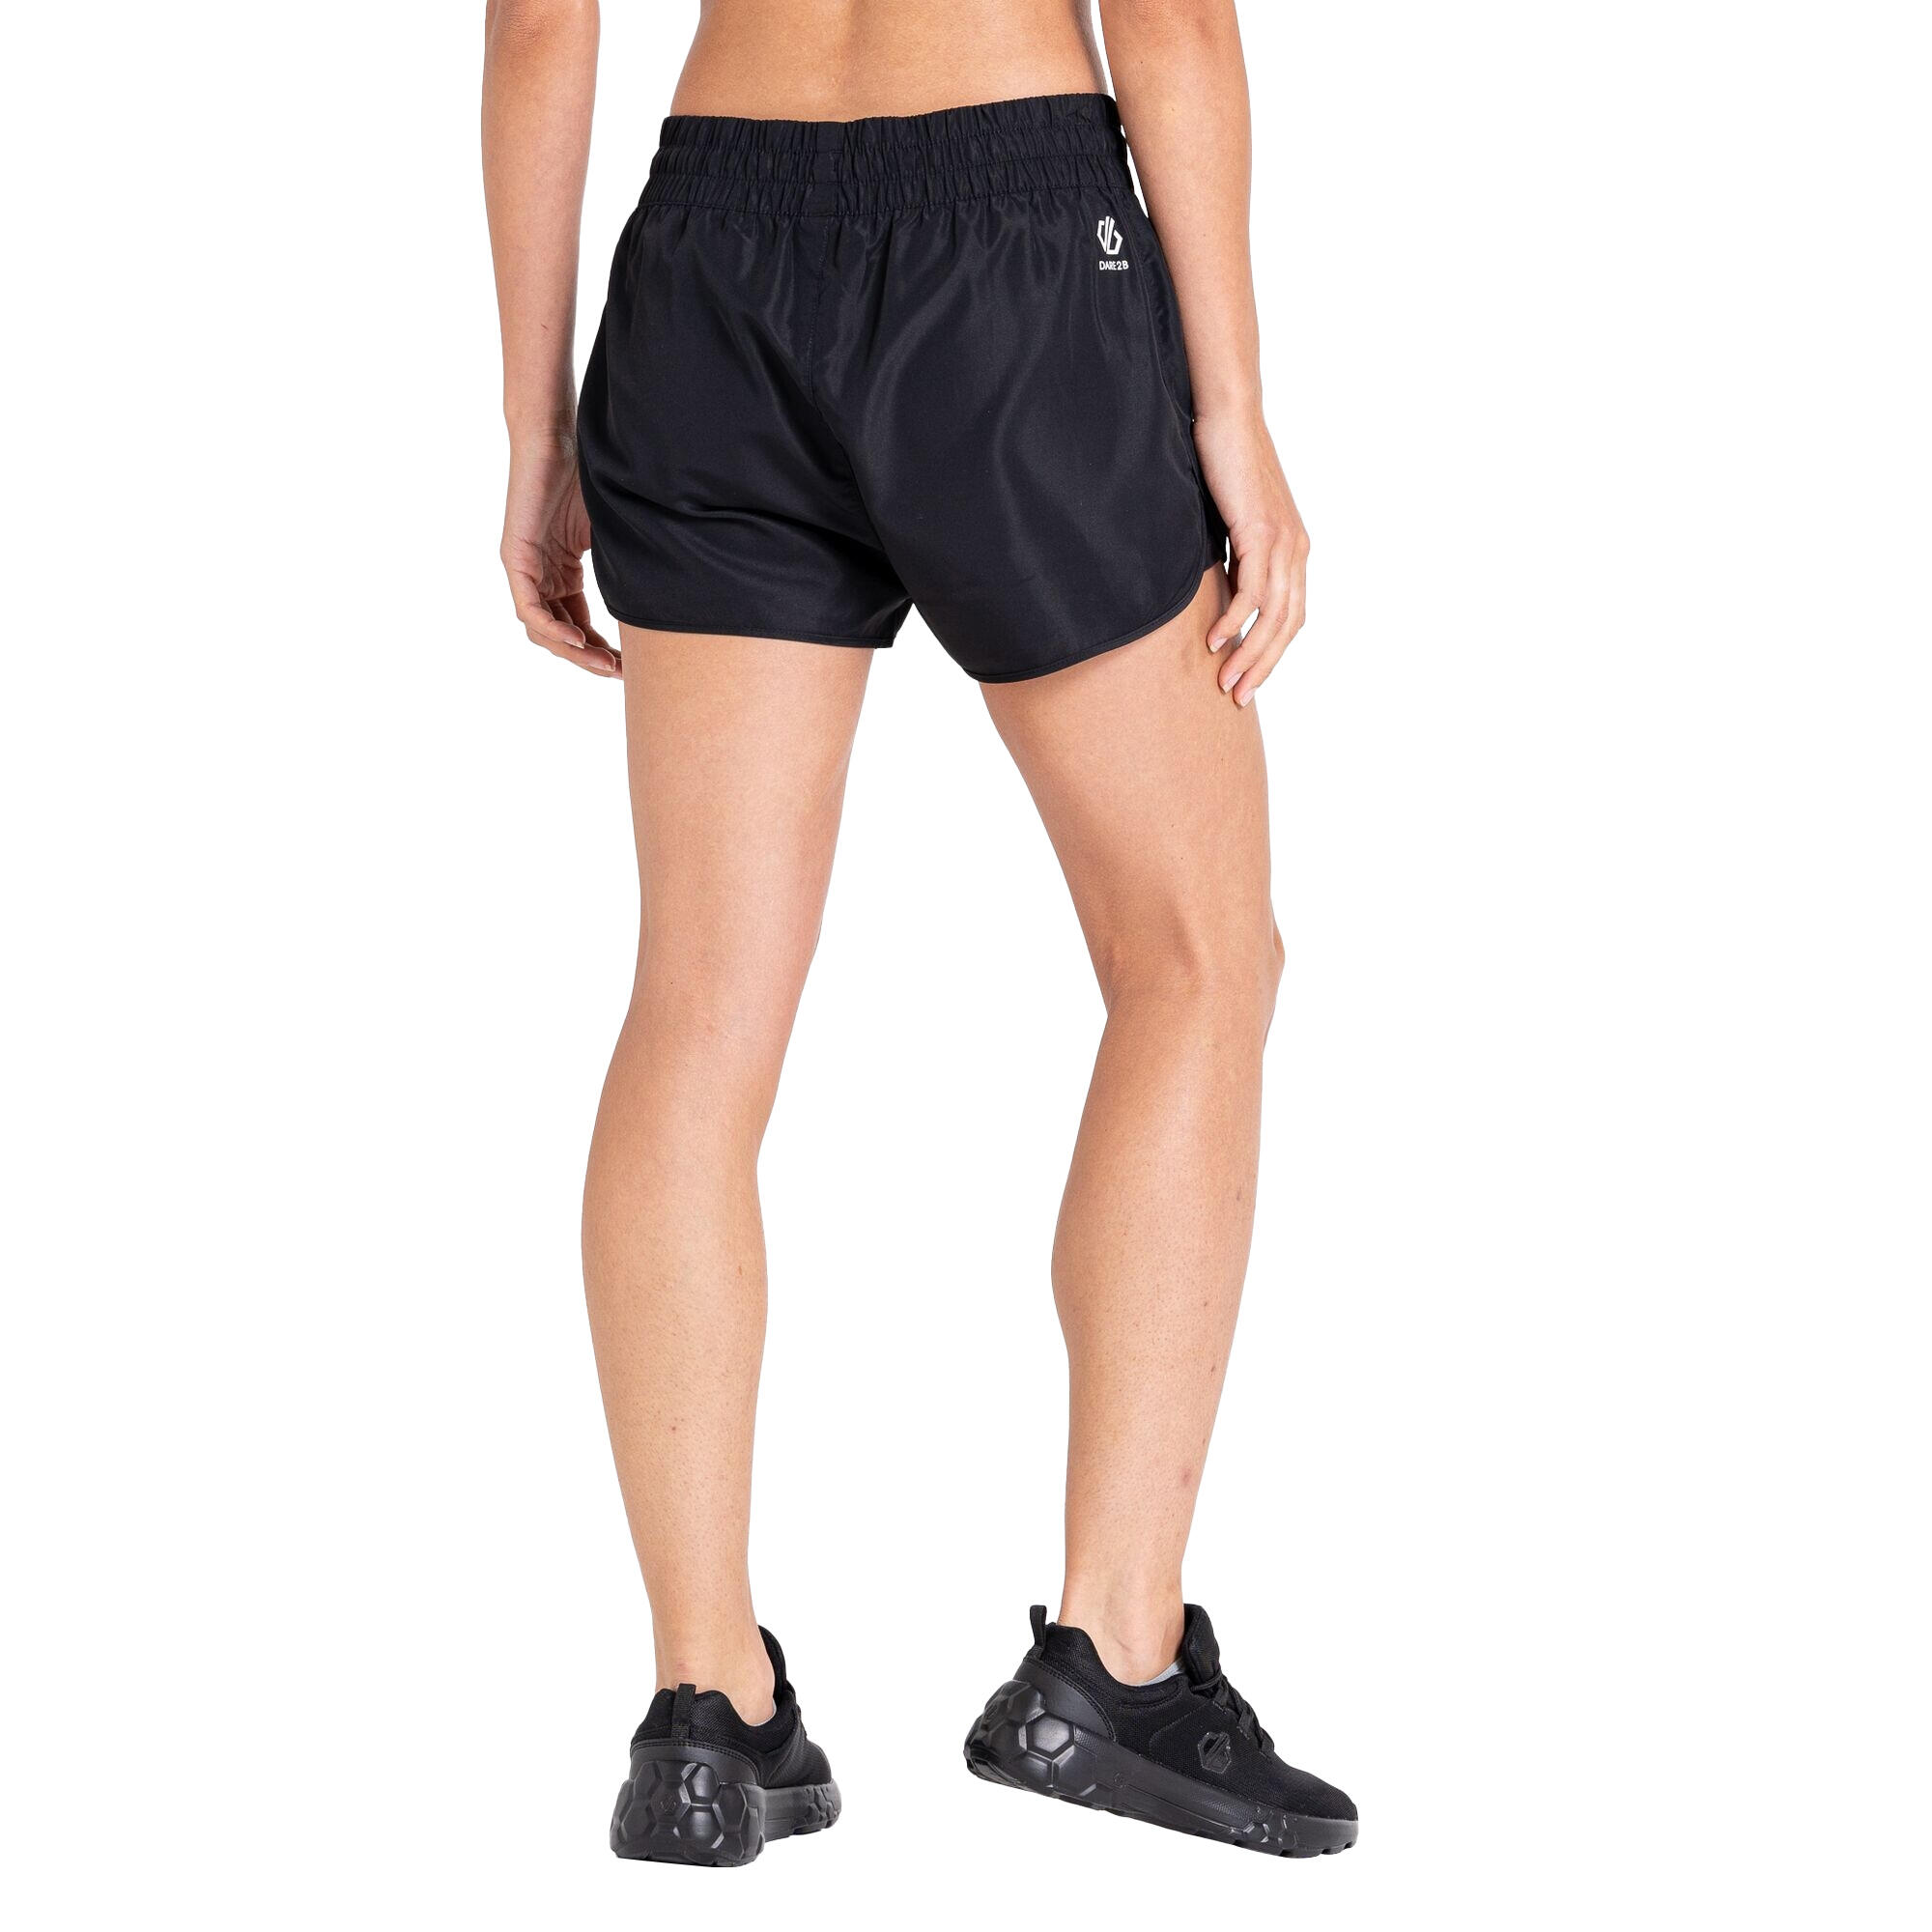 Womens/Ladies Sprint Up 2 in 1 Shorts (Black) 4/5